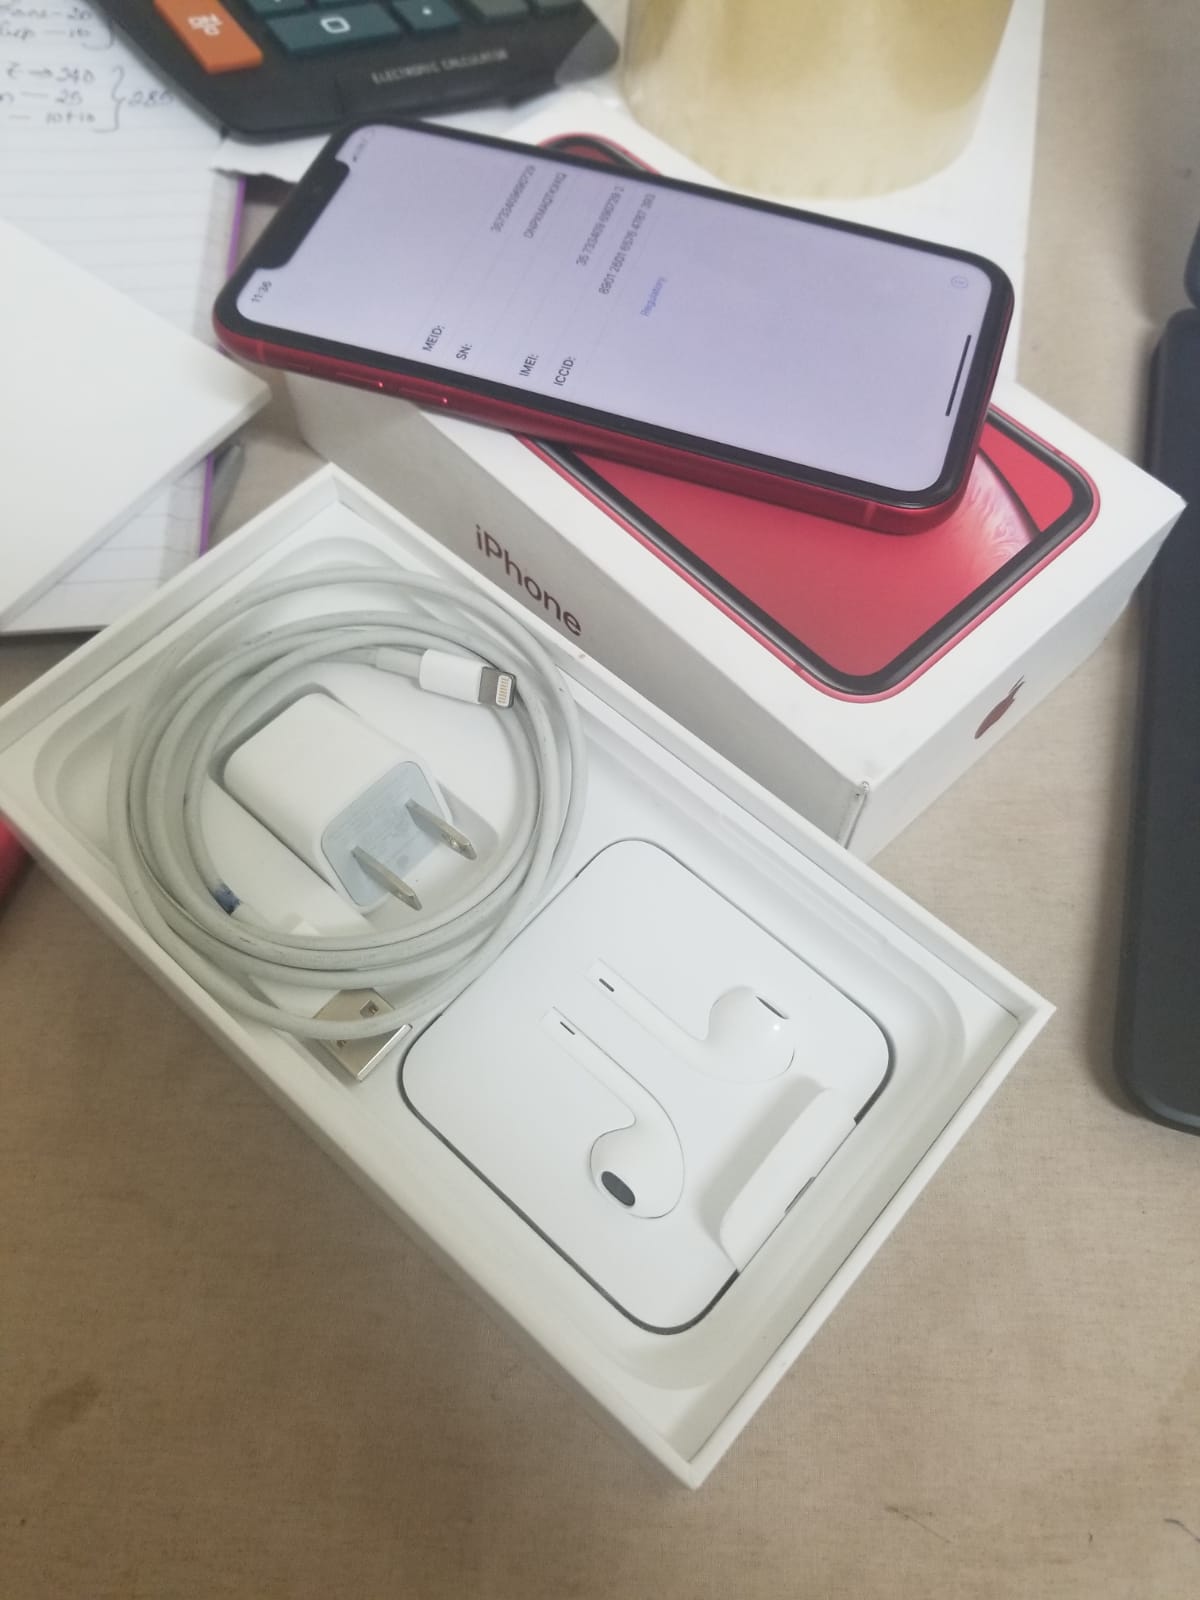 Red Iphone Xr. Box And Accessories. ***SOLD*** - Technology Market - Nigeria